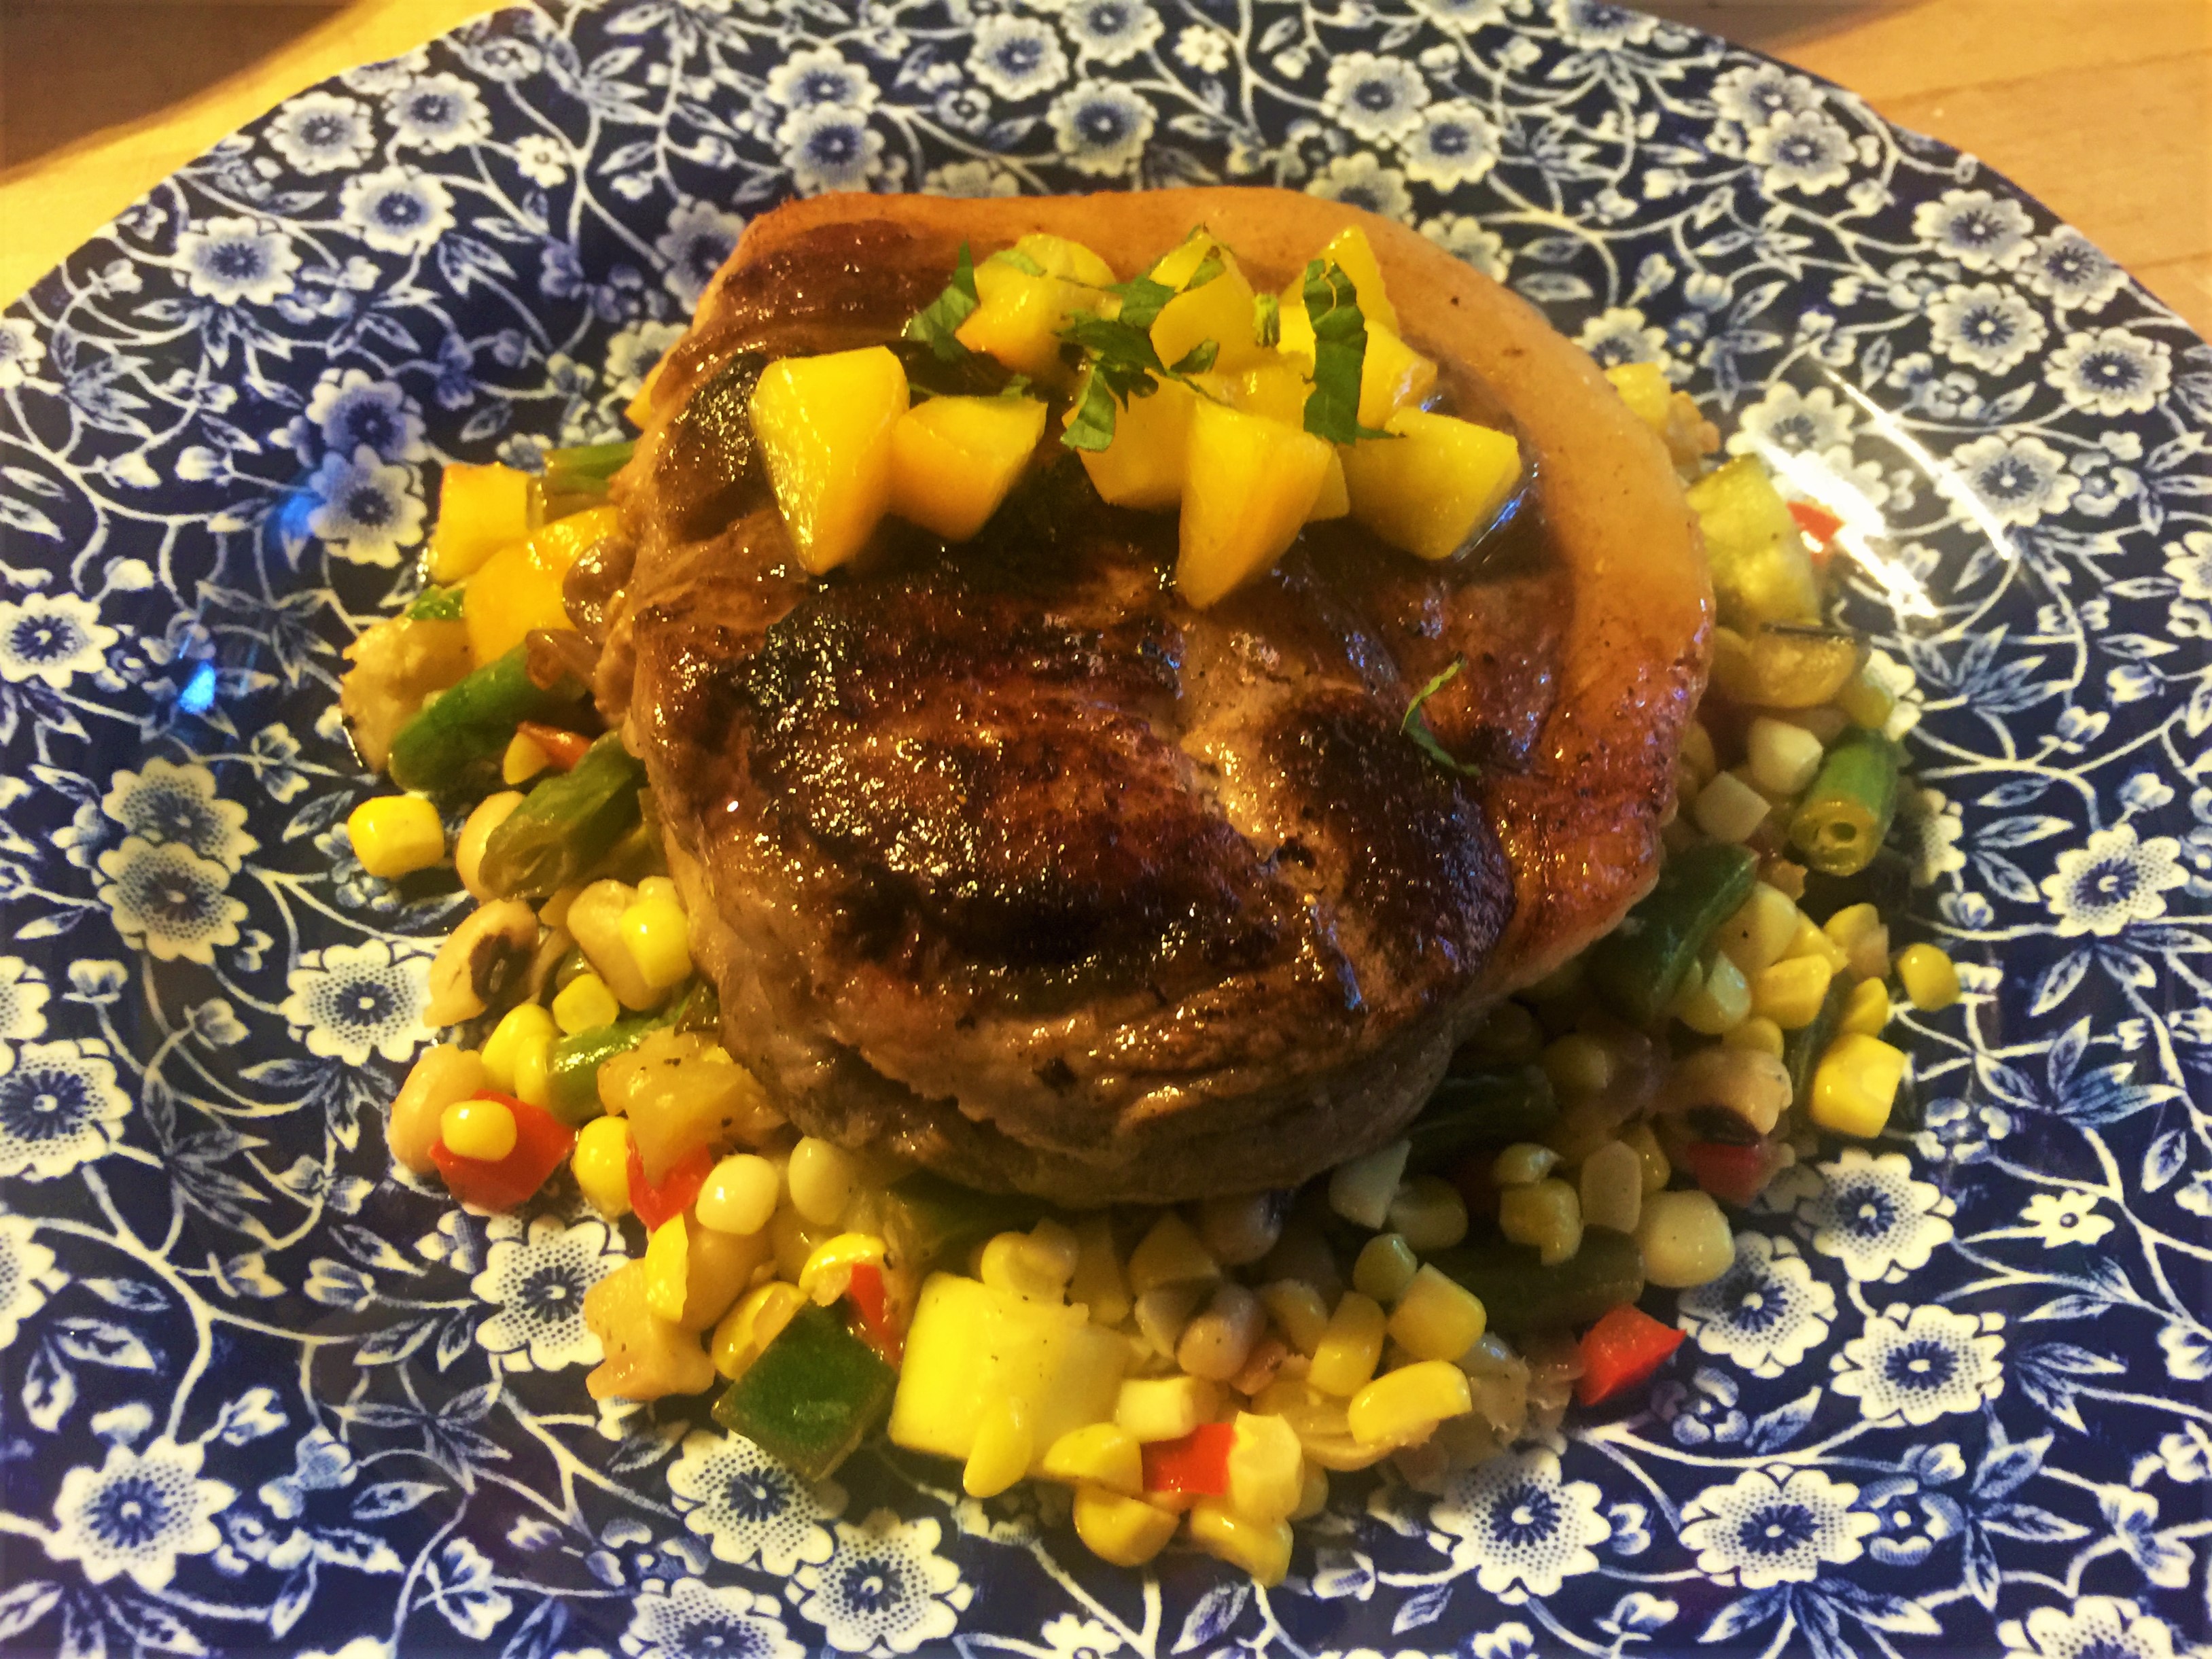 Heritage pork ribeye with peach demiglace and seasonal succotash from a dinner we preapred for guests at the Old Caledonian Bed & Breakfast.